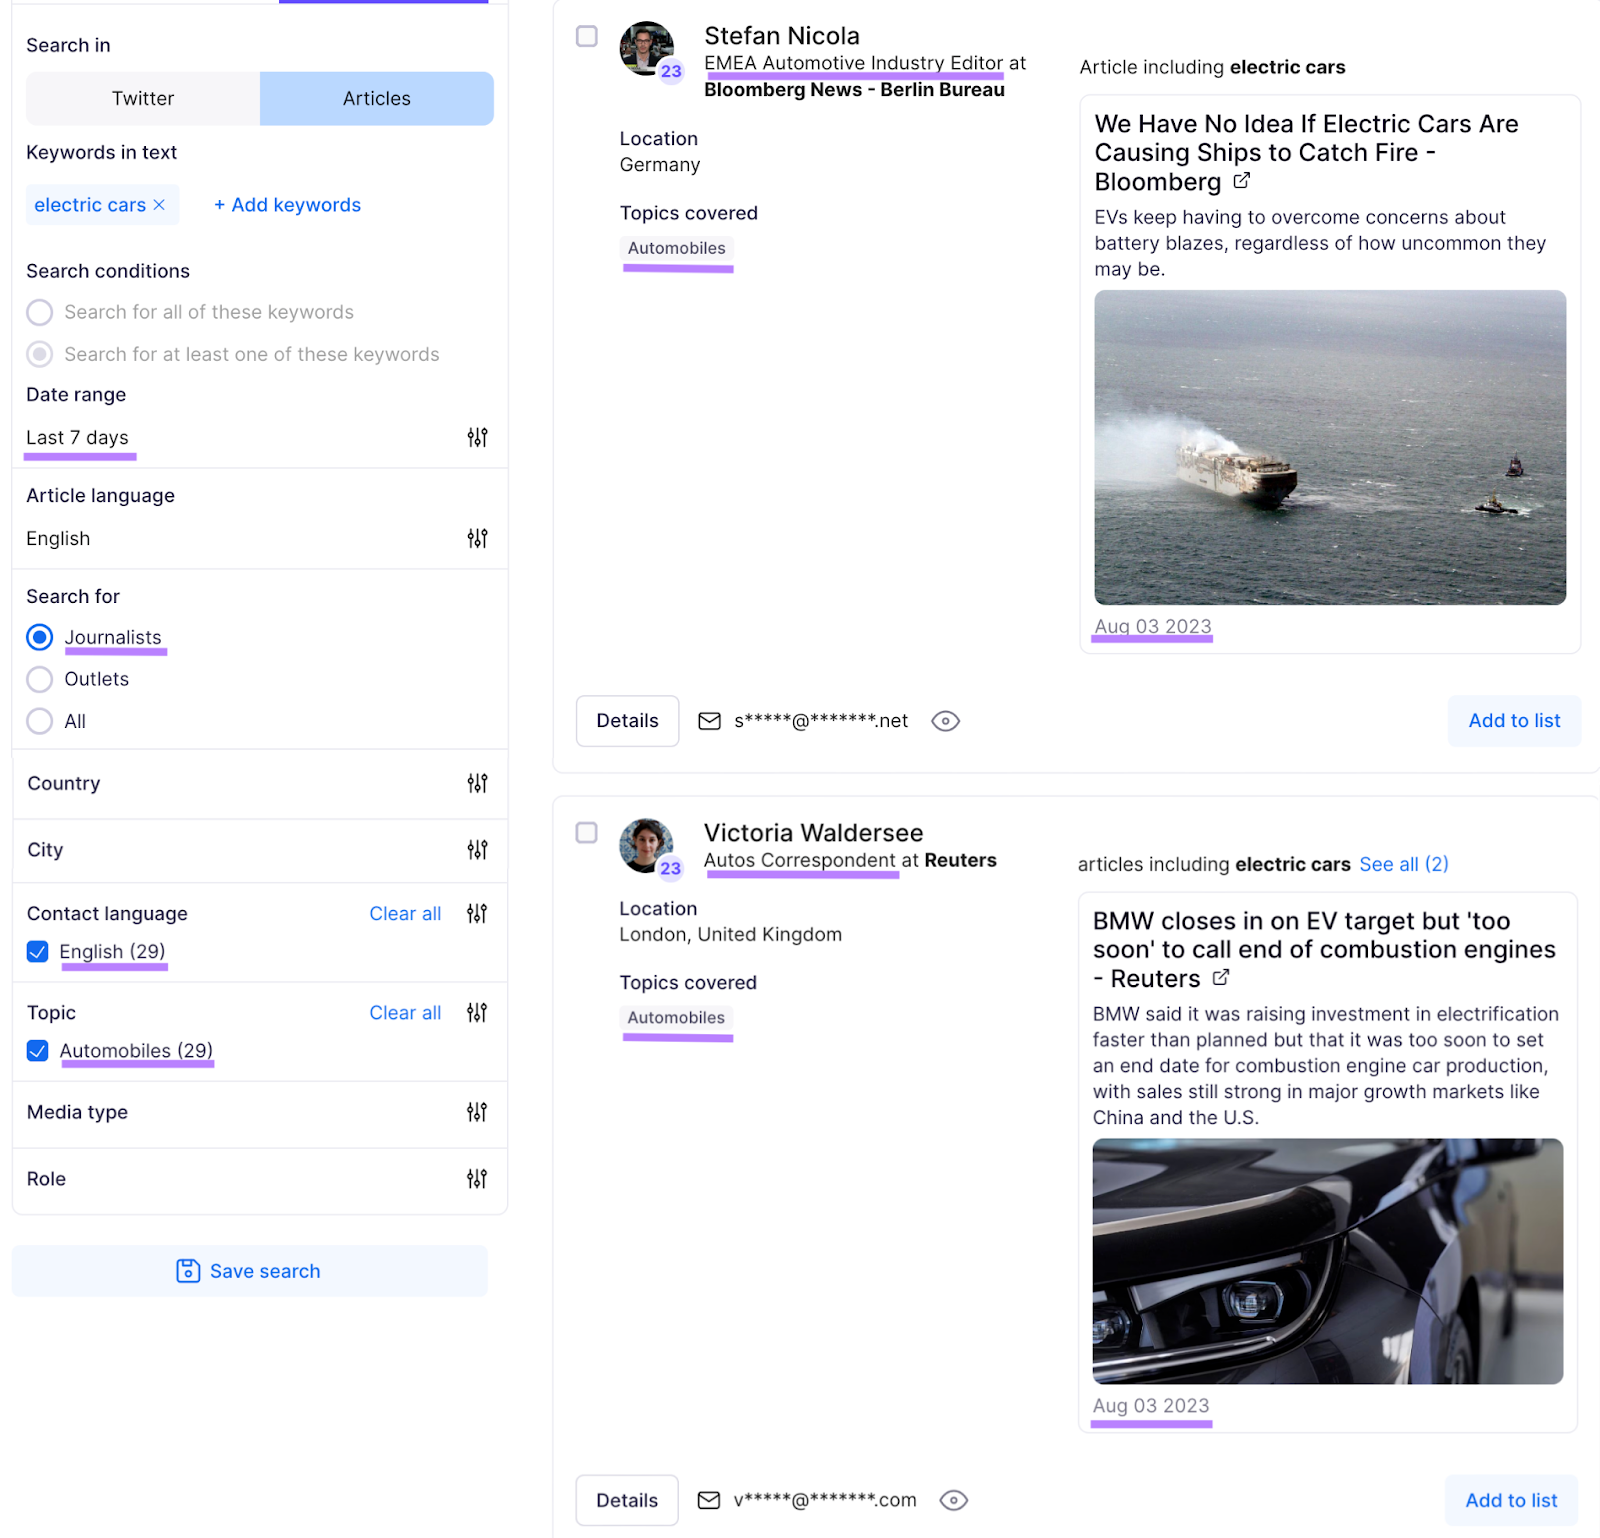 with Prowly you can also filter results by language, location, and more